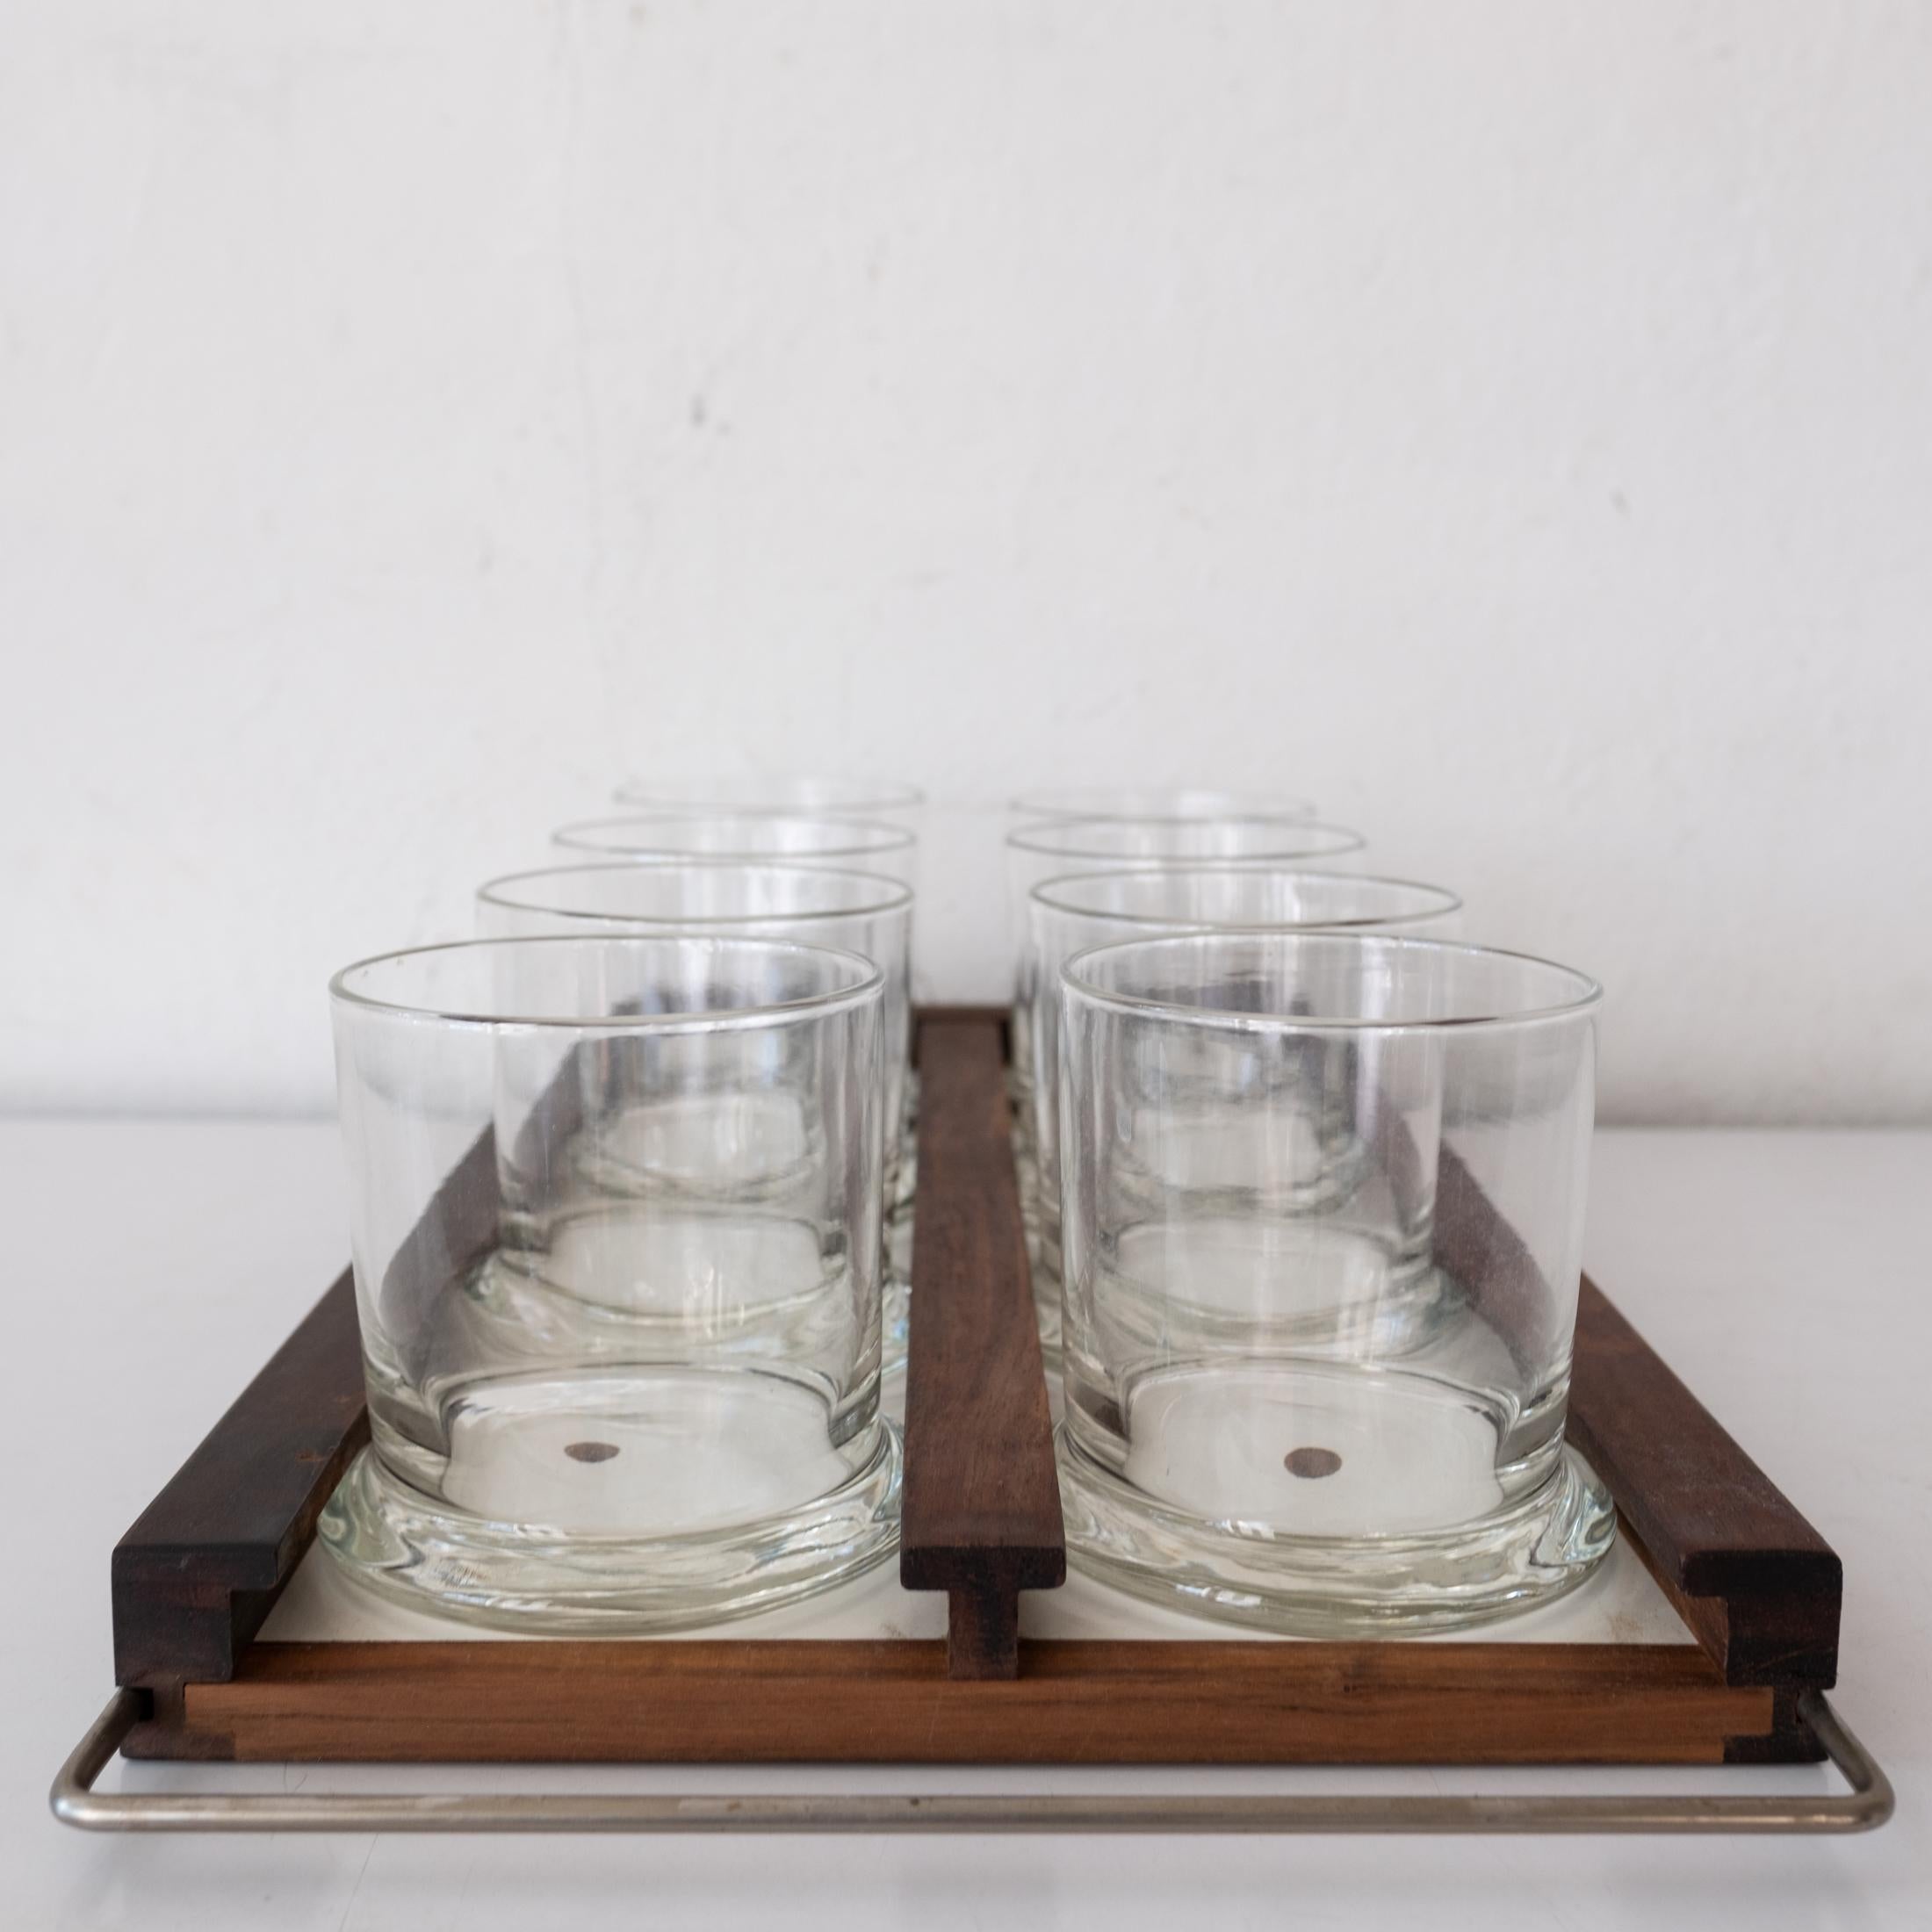 American Walnut and Brass Wall Mounted Tray and Glasses For Sale